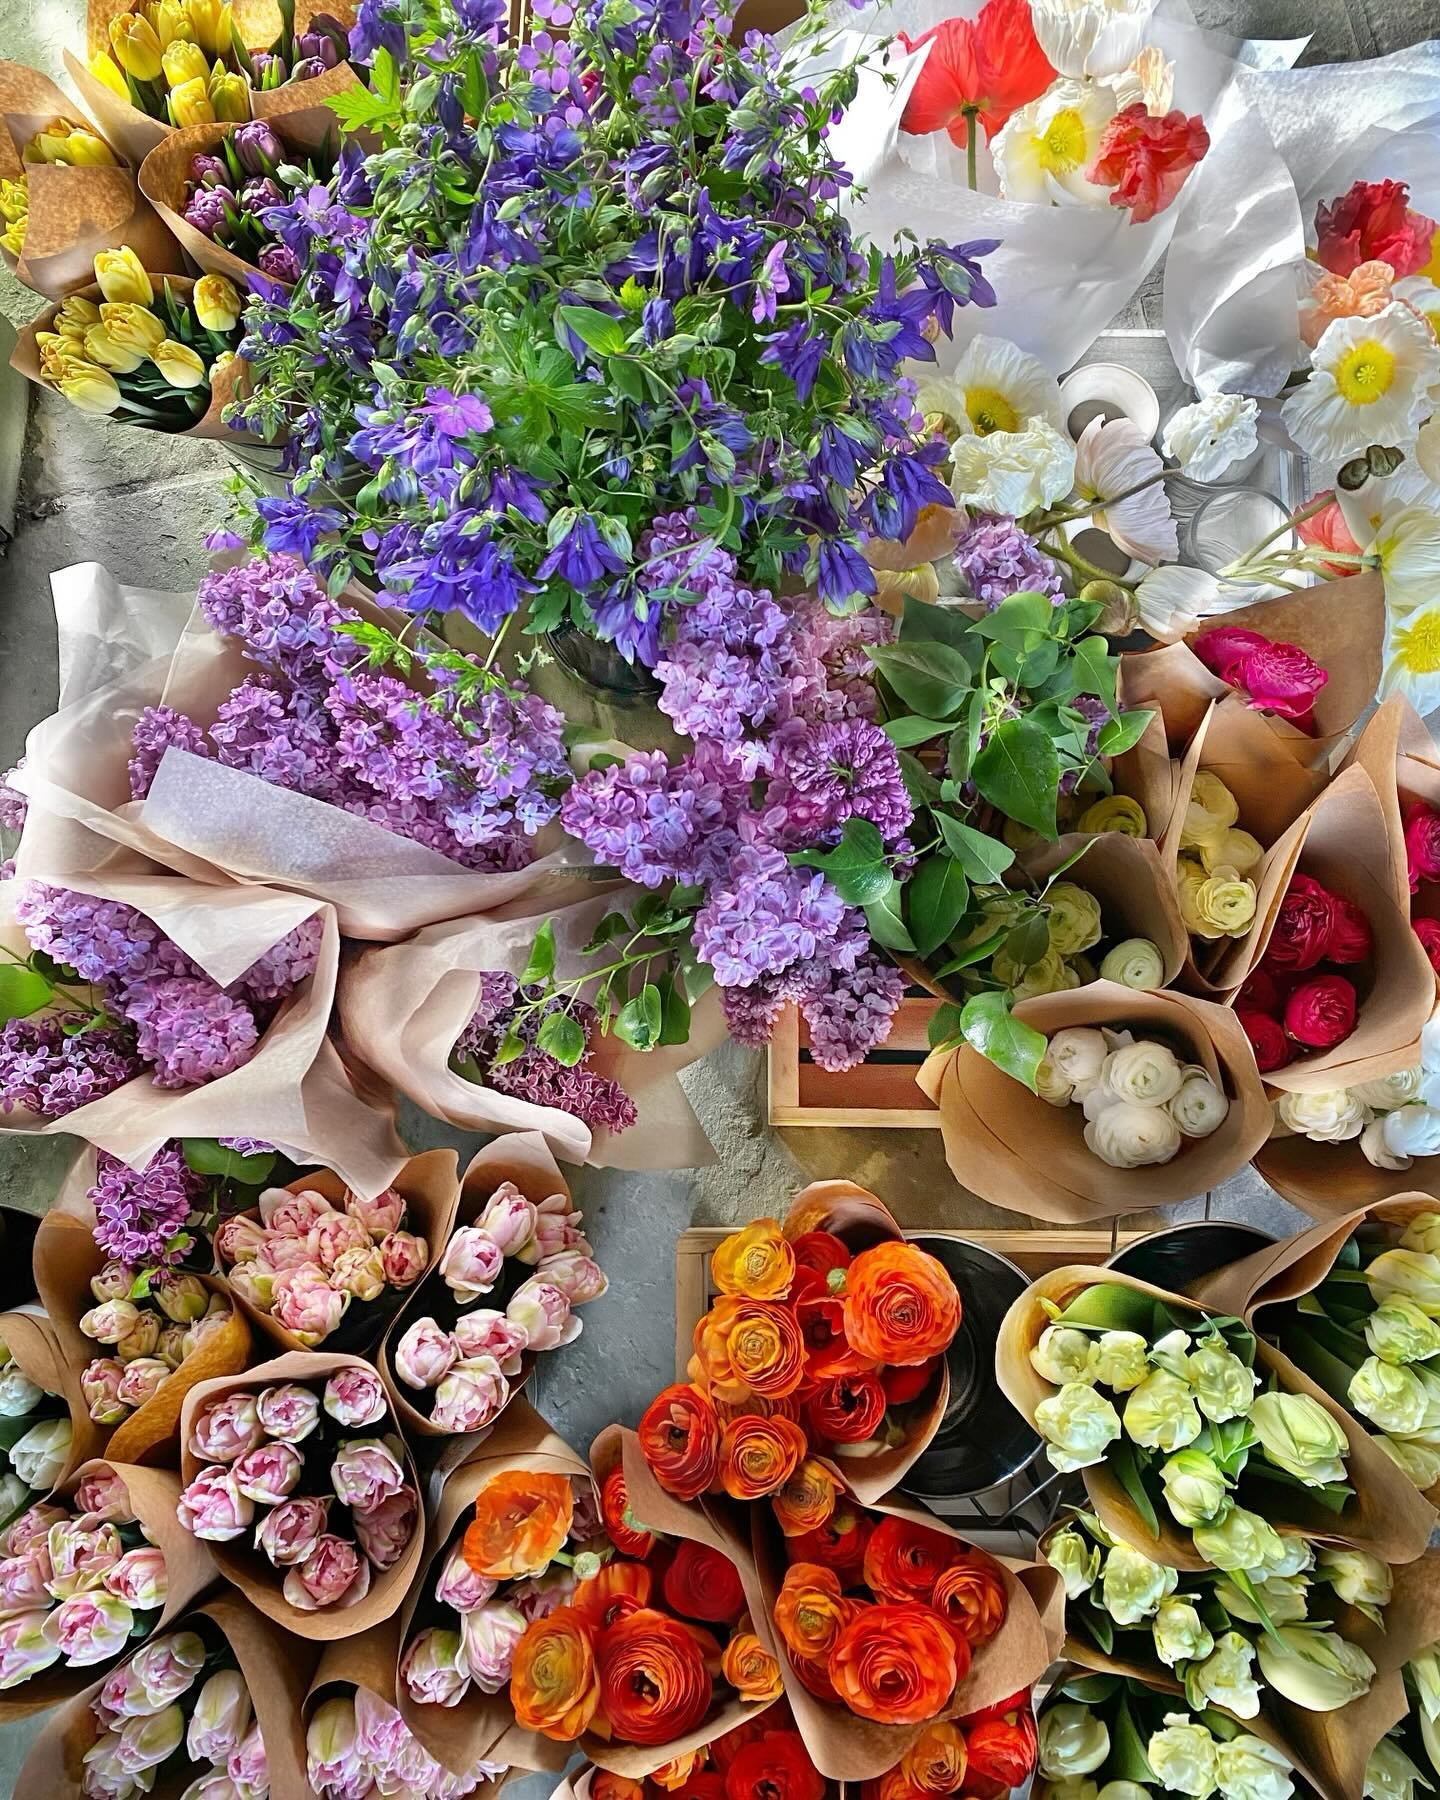 Good morning, Beacon!! Come hang with your local farmers and food producers today at @beaconfarmersmarket , and let&rsquo;s flower together! We&rsquo;ve got fancy tulips, fragrant lilacs, giant Hummingbird poppies, wild Columbine, anemone and very el